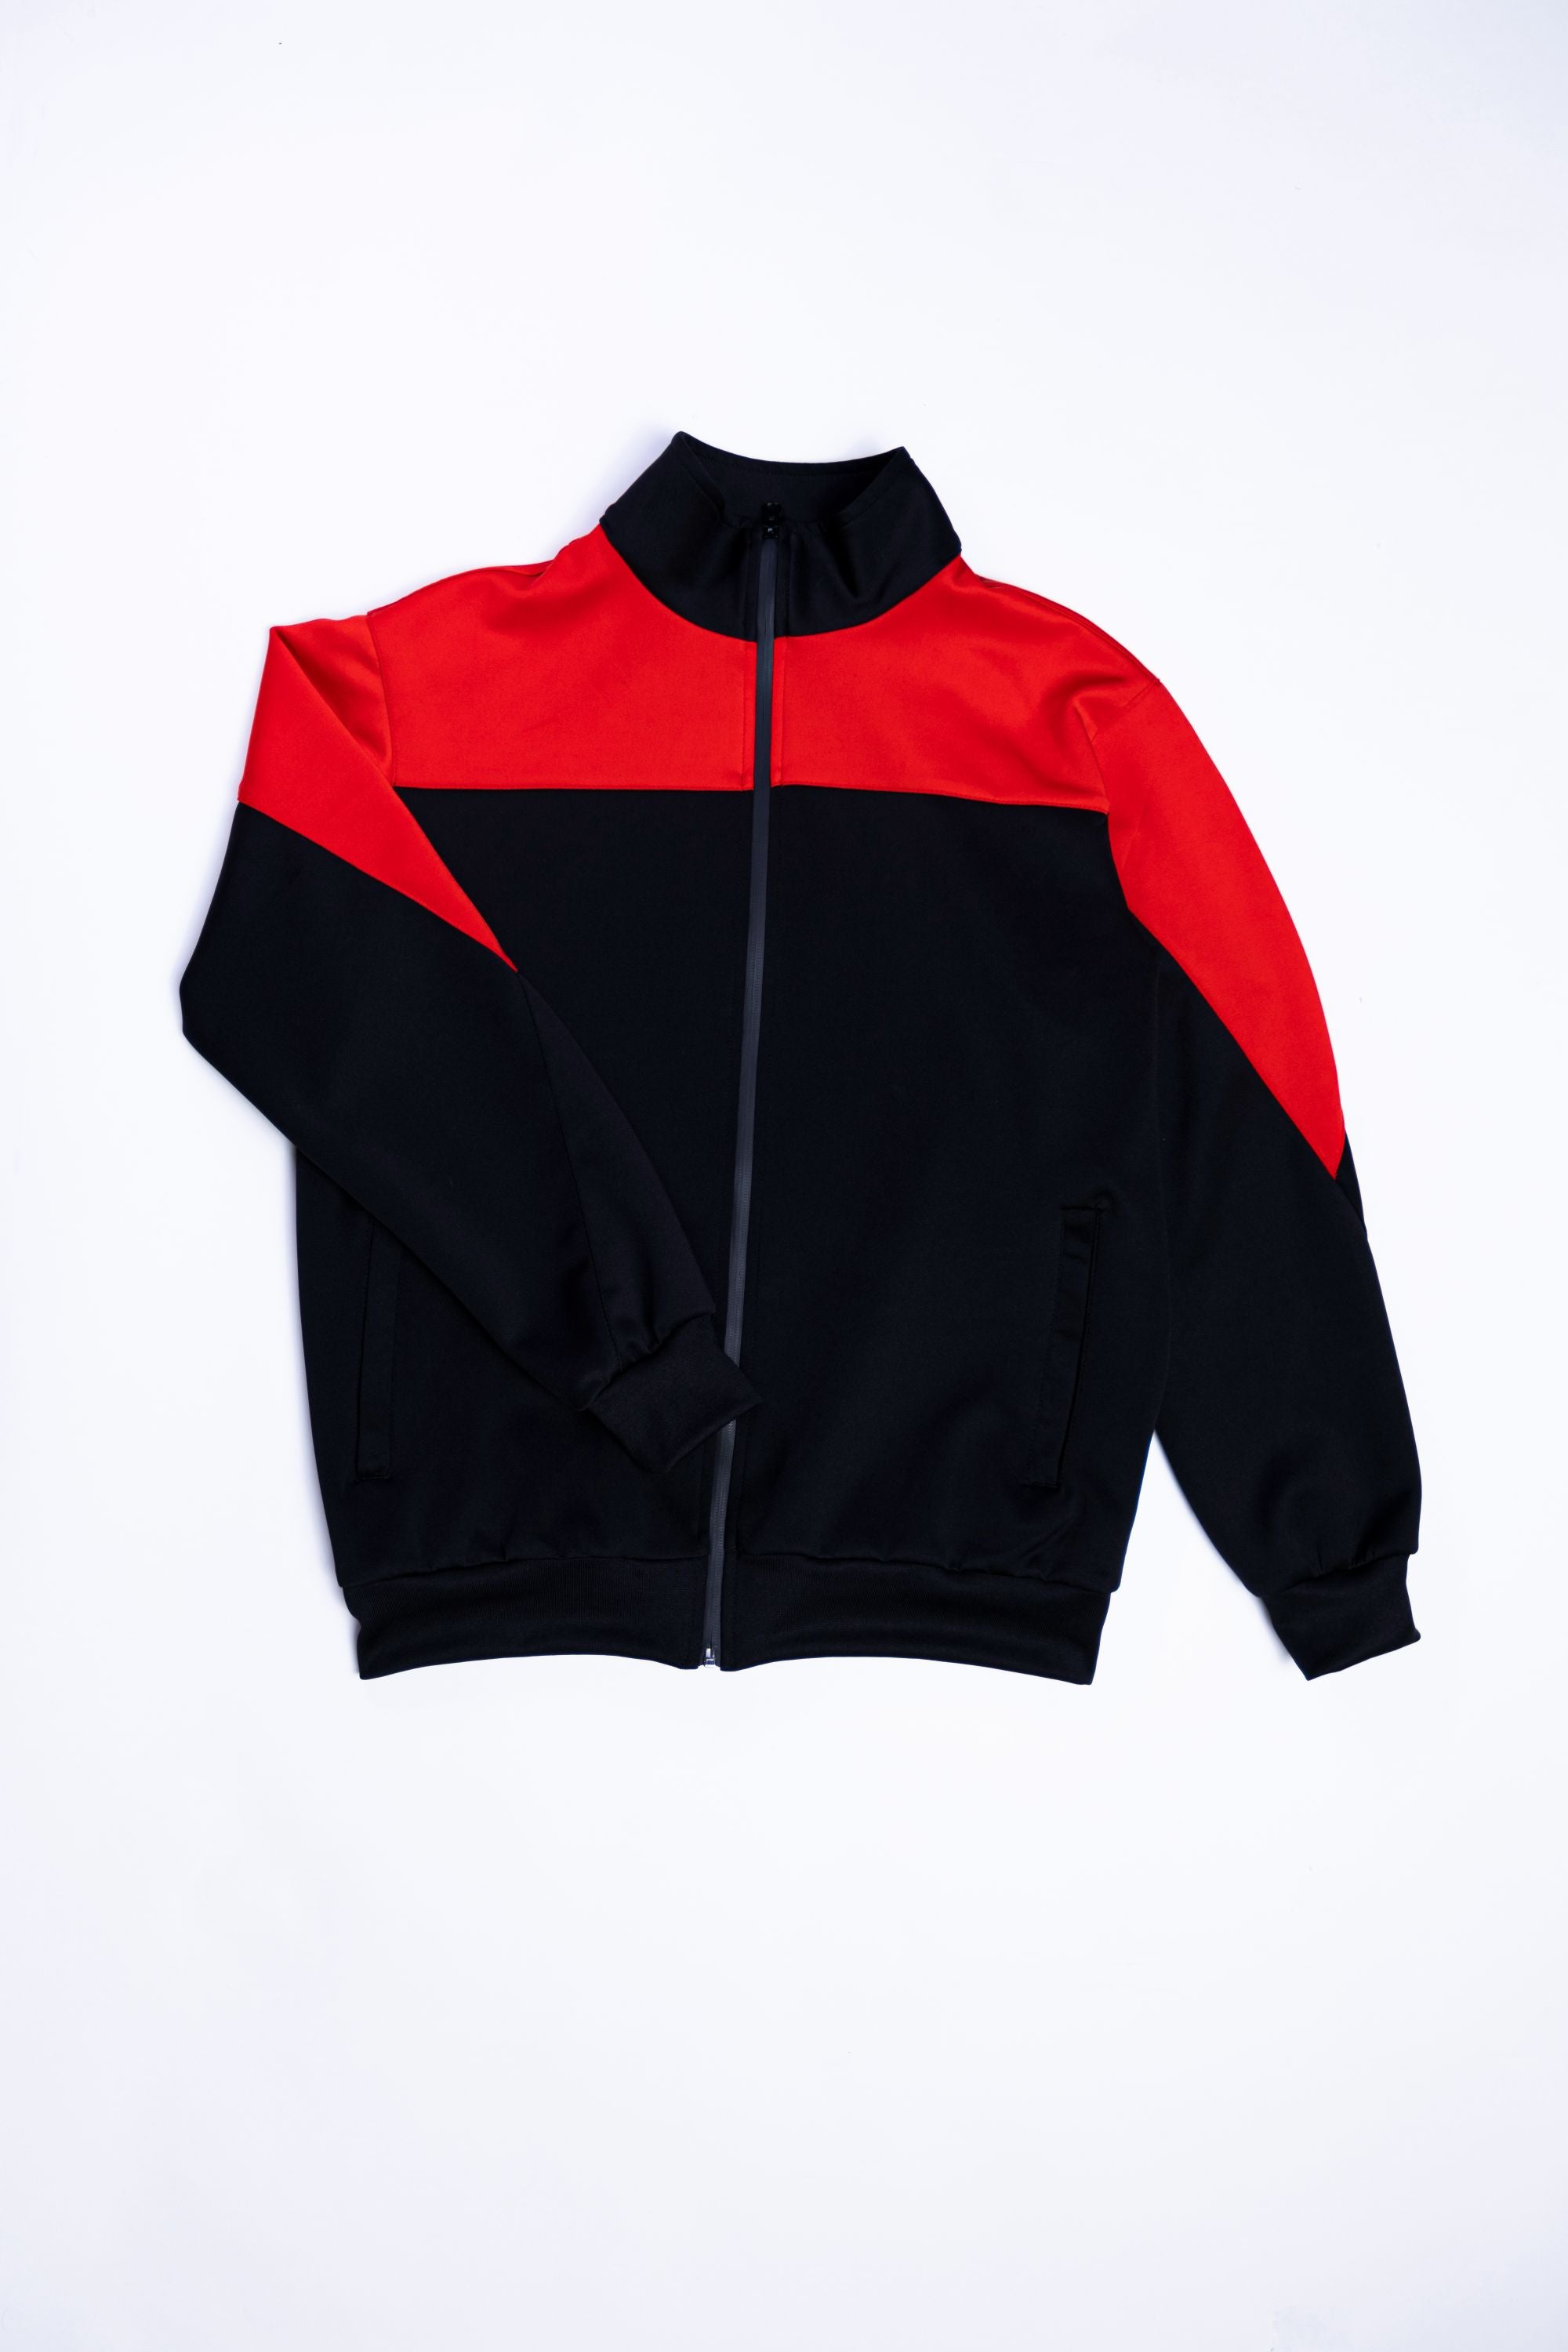 MEN HOODIE BLACK AND RED COLOUR